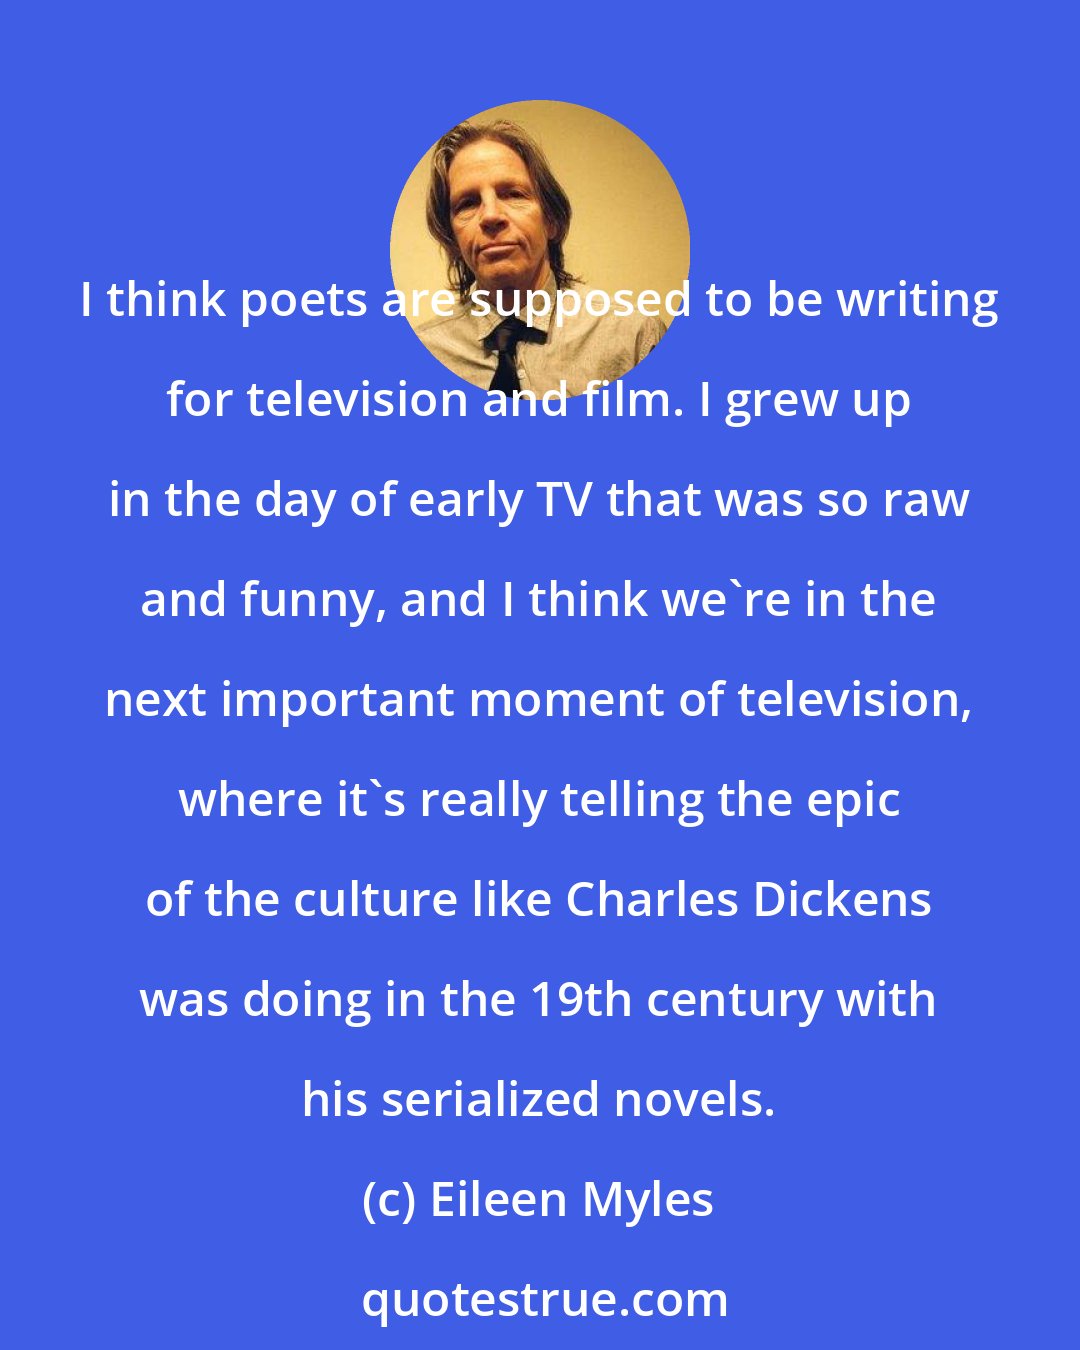 Eileen Myles: I think poets are supposed to be writing for television and film. I grew up in the day of early TV that was so raw and funny, and I think we're in the next important moment of television, where it's really telling the epic of the culture like Charles Dickens was doing in the 19th century with his serialized novels.